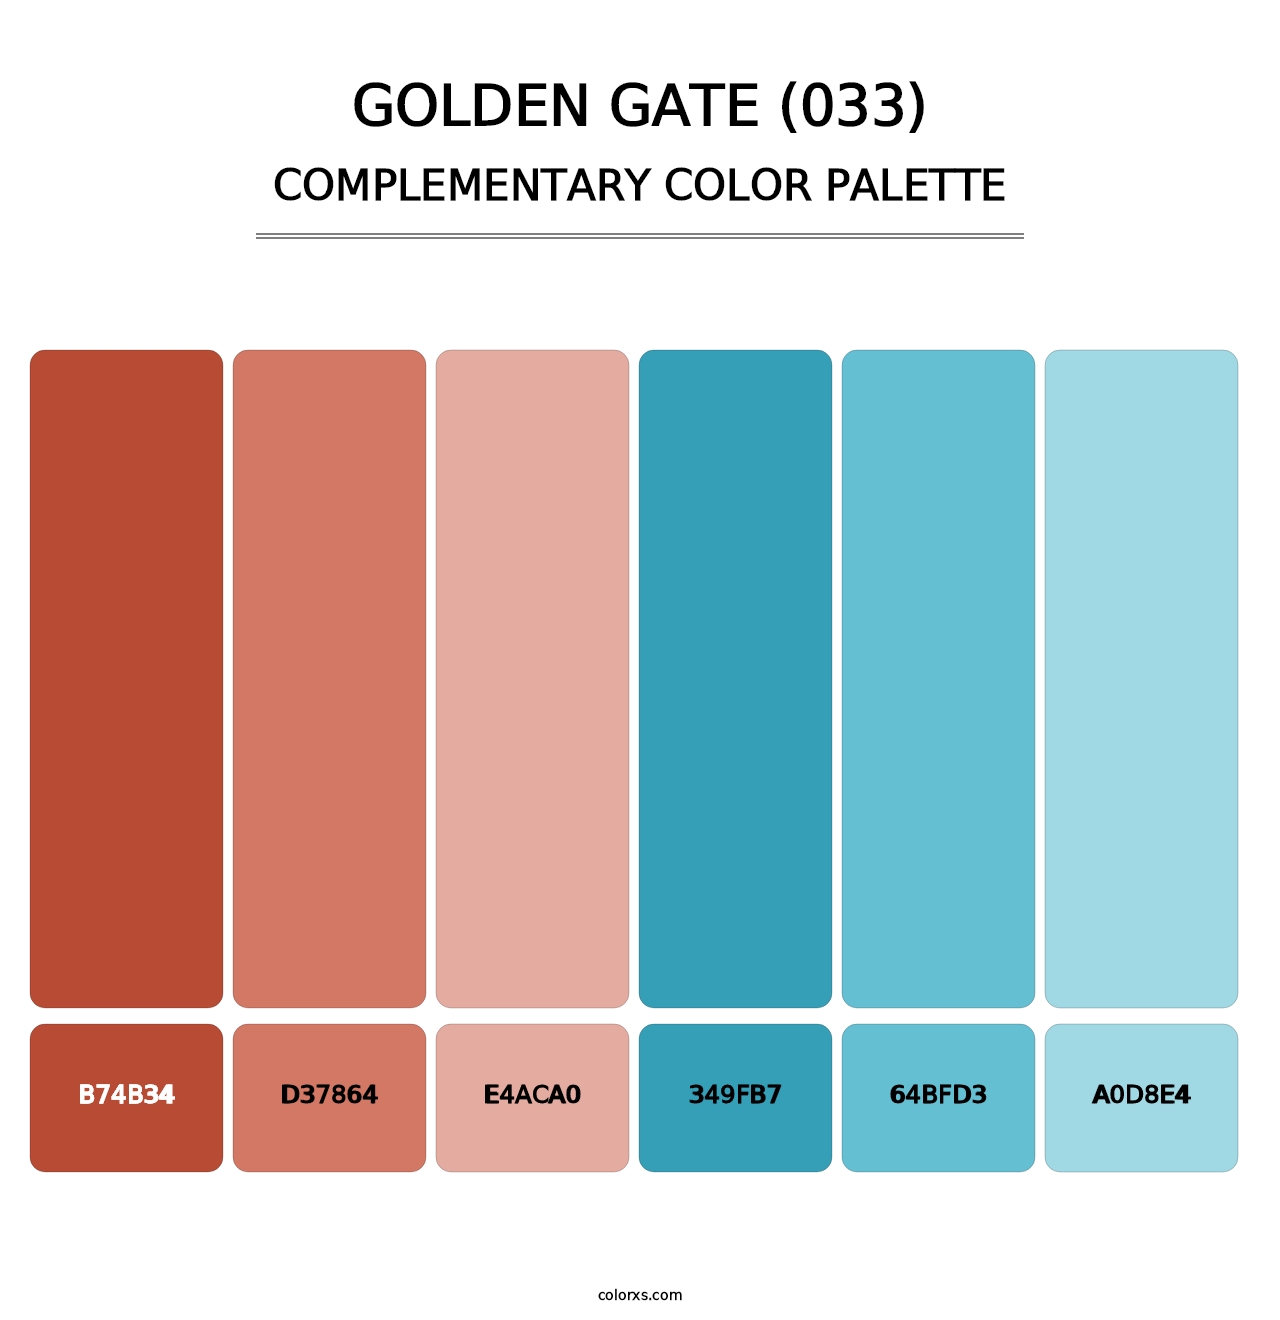 Golden Gate (033) - Complementary Color Palette